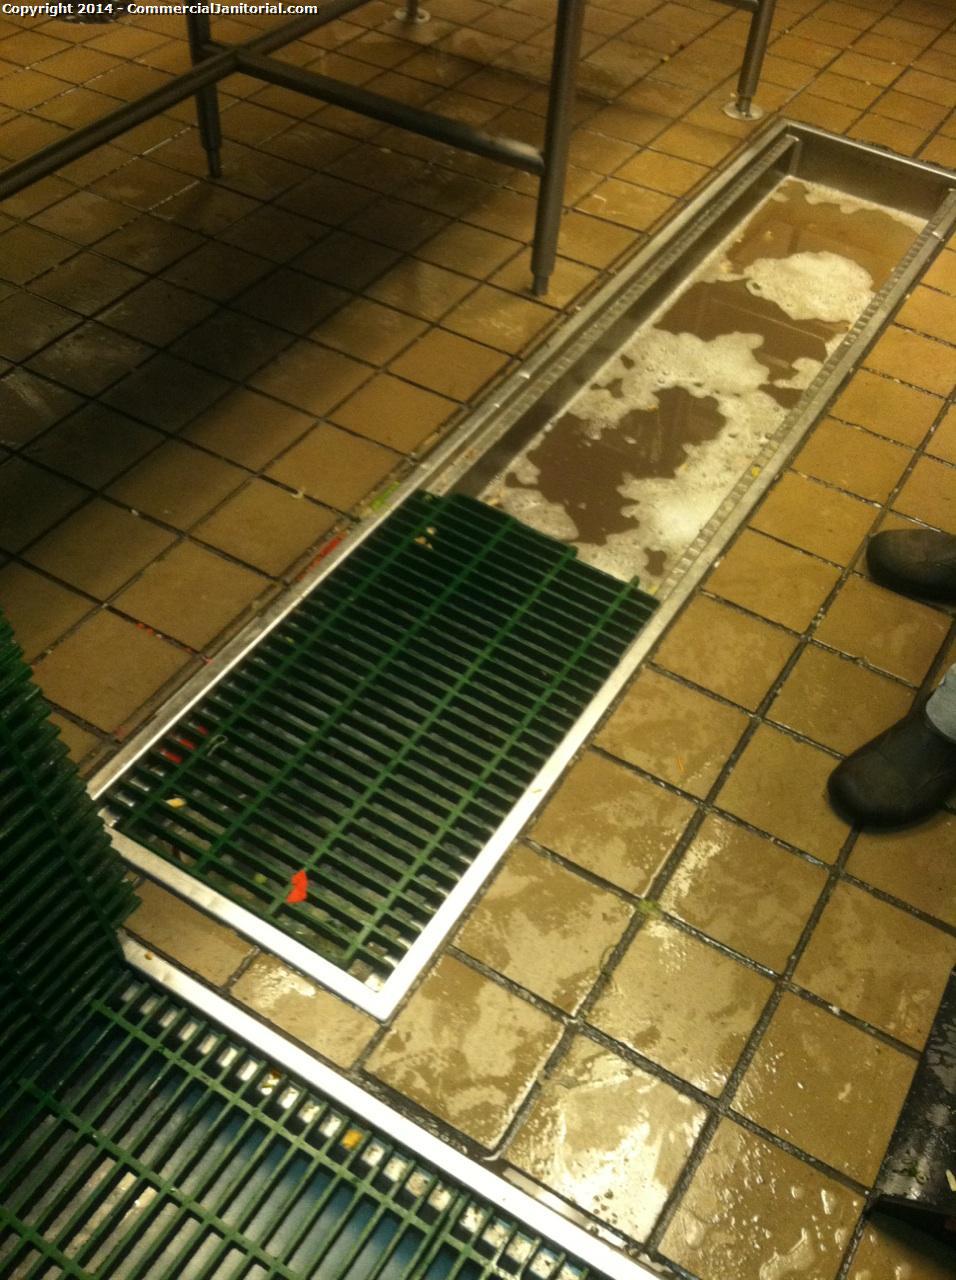 
2. The crew came in to find the drain in the dishwashing pit area clogged. They take a plunger to unclog it. This is a normal occurrence. See 2 photos.
